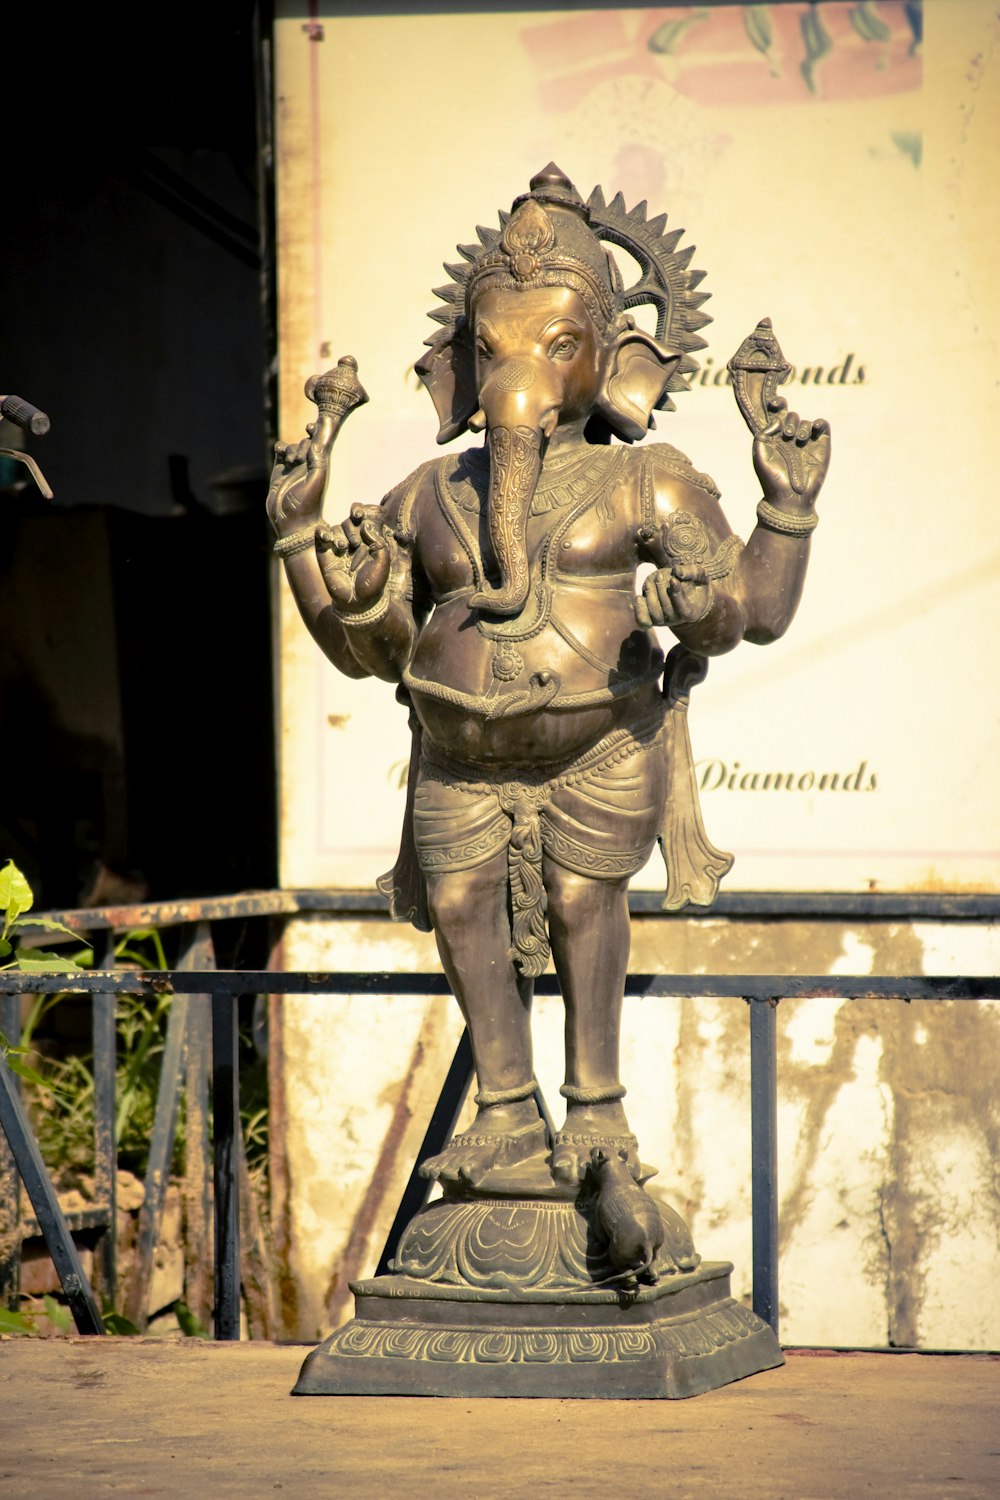 a statue of an elephant god in front of a building